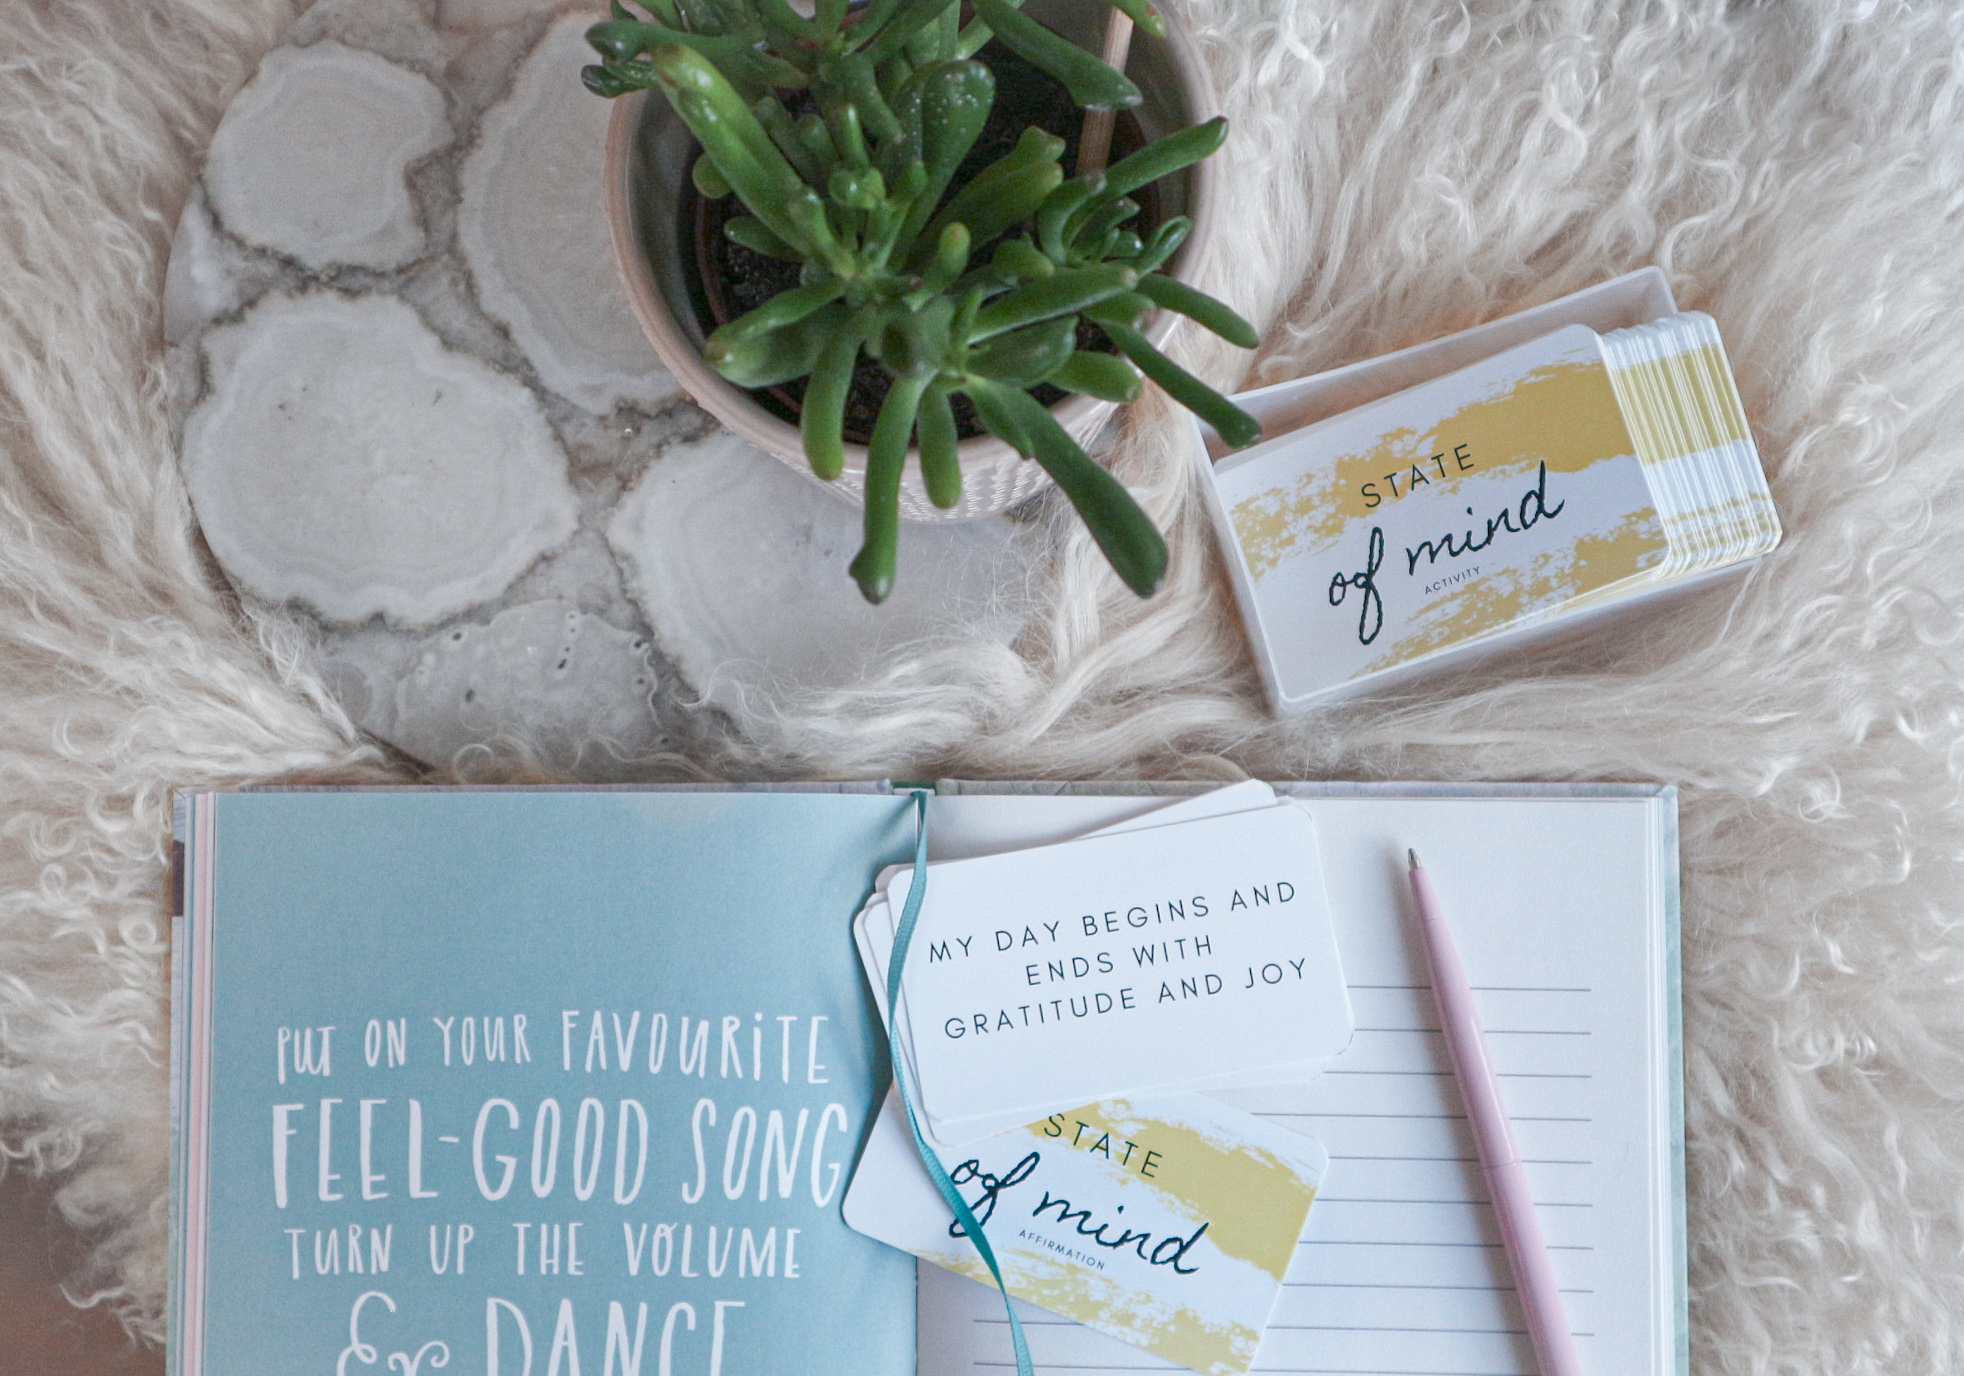 How To Use Affirmation Cards For Wellbeing